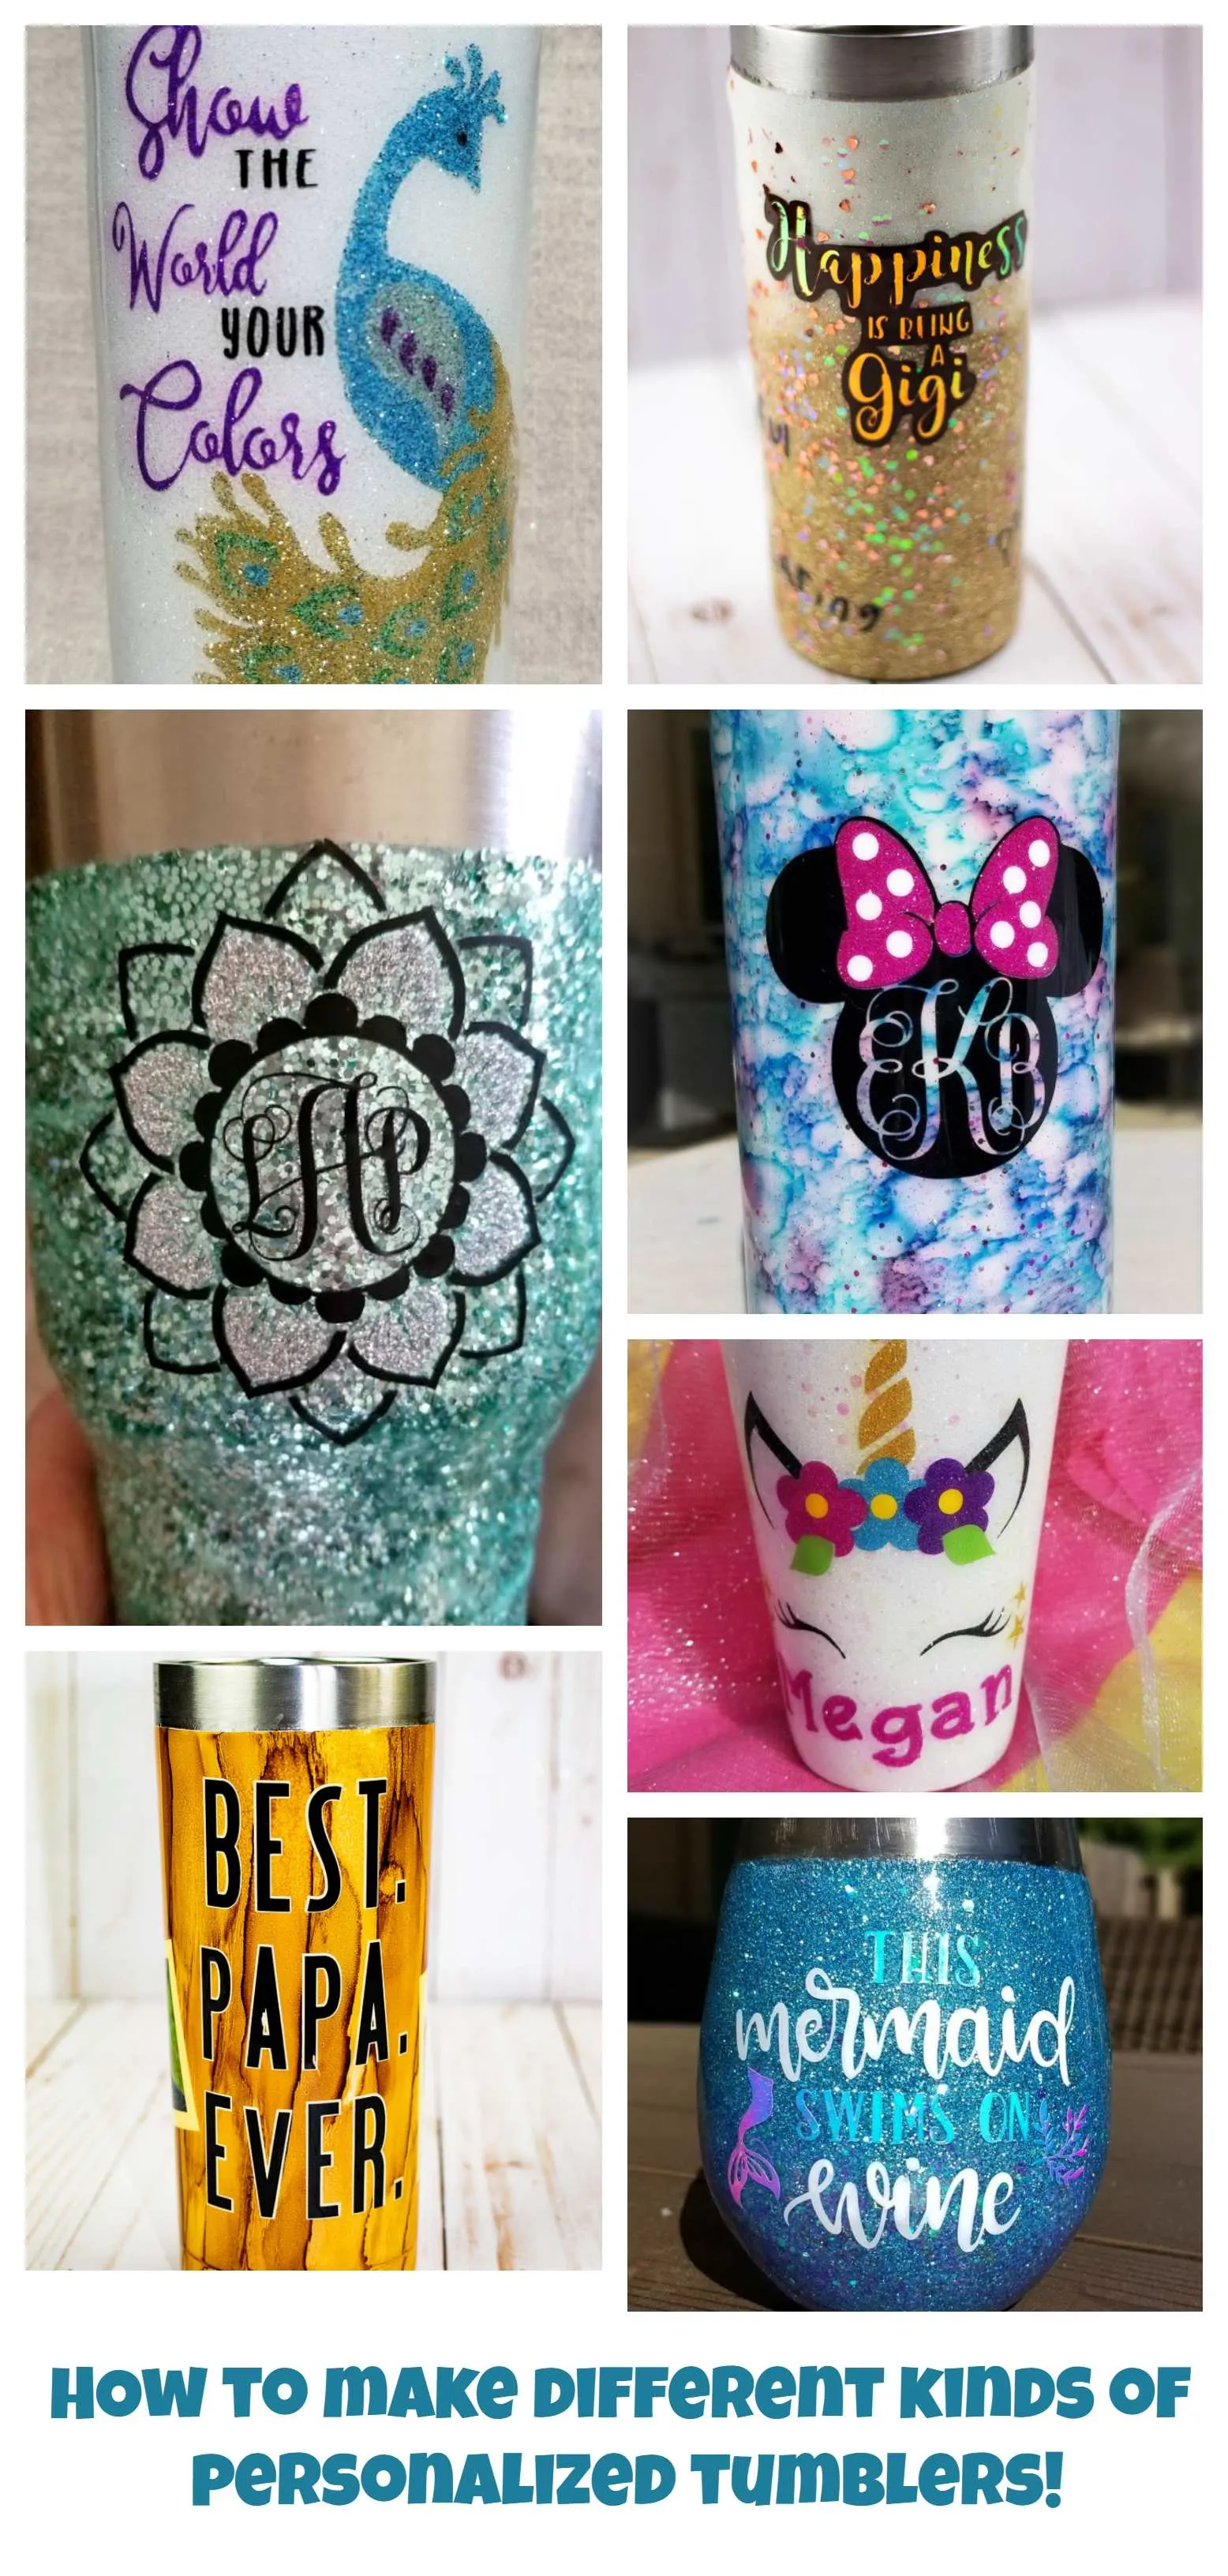 Customize your YETI drinkware with free monogramming for Valentine's